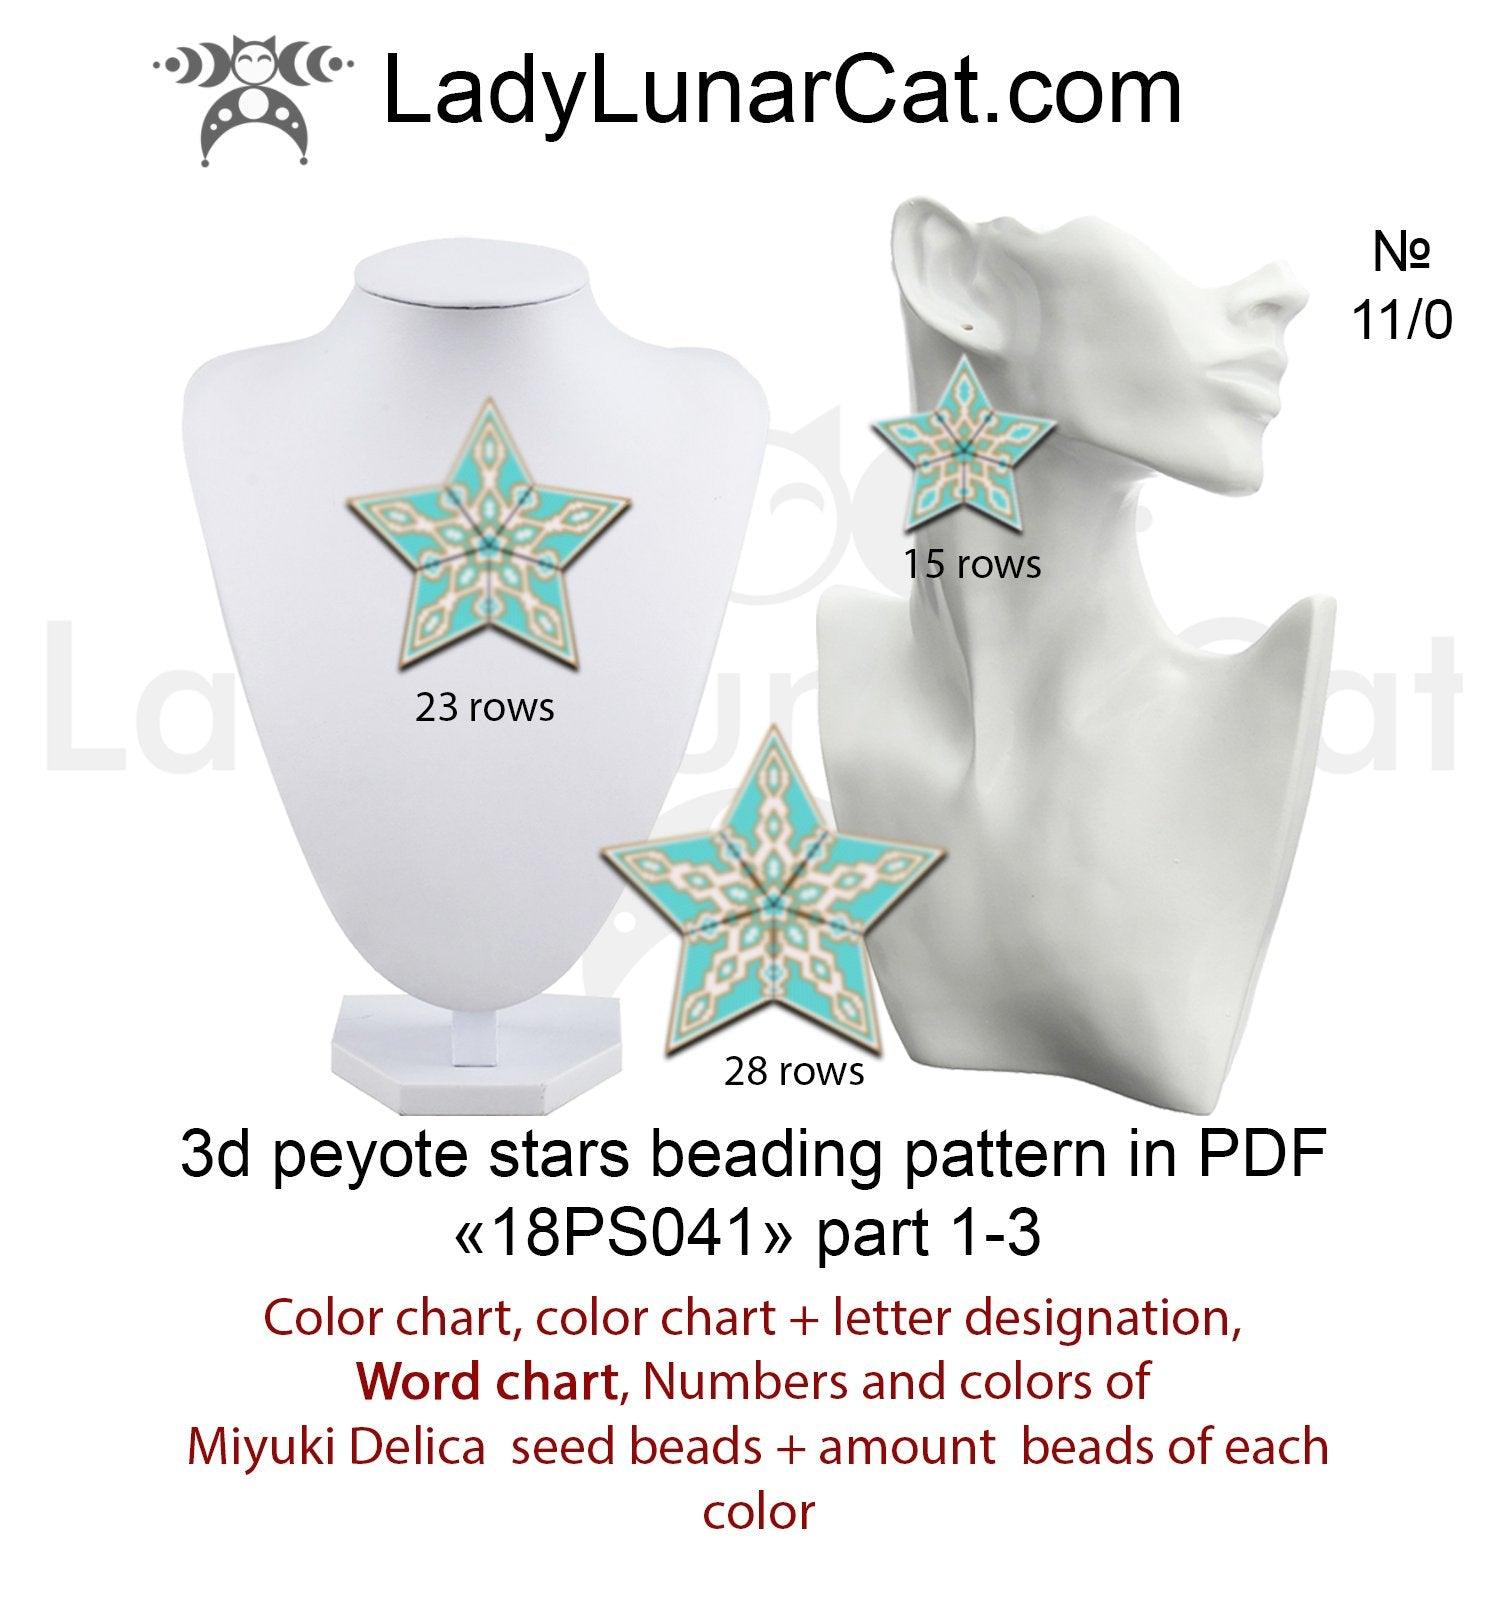 Peyote star patterns for beading Christmas ornament 18PS041 LadyLunarCat